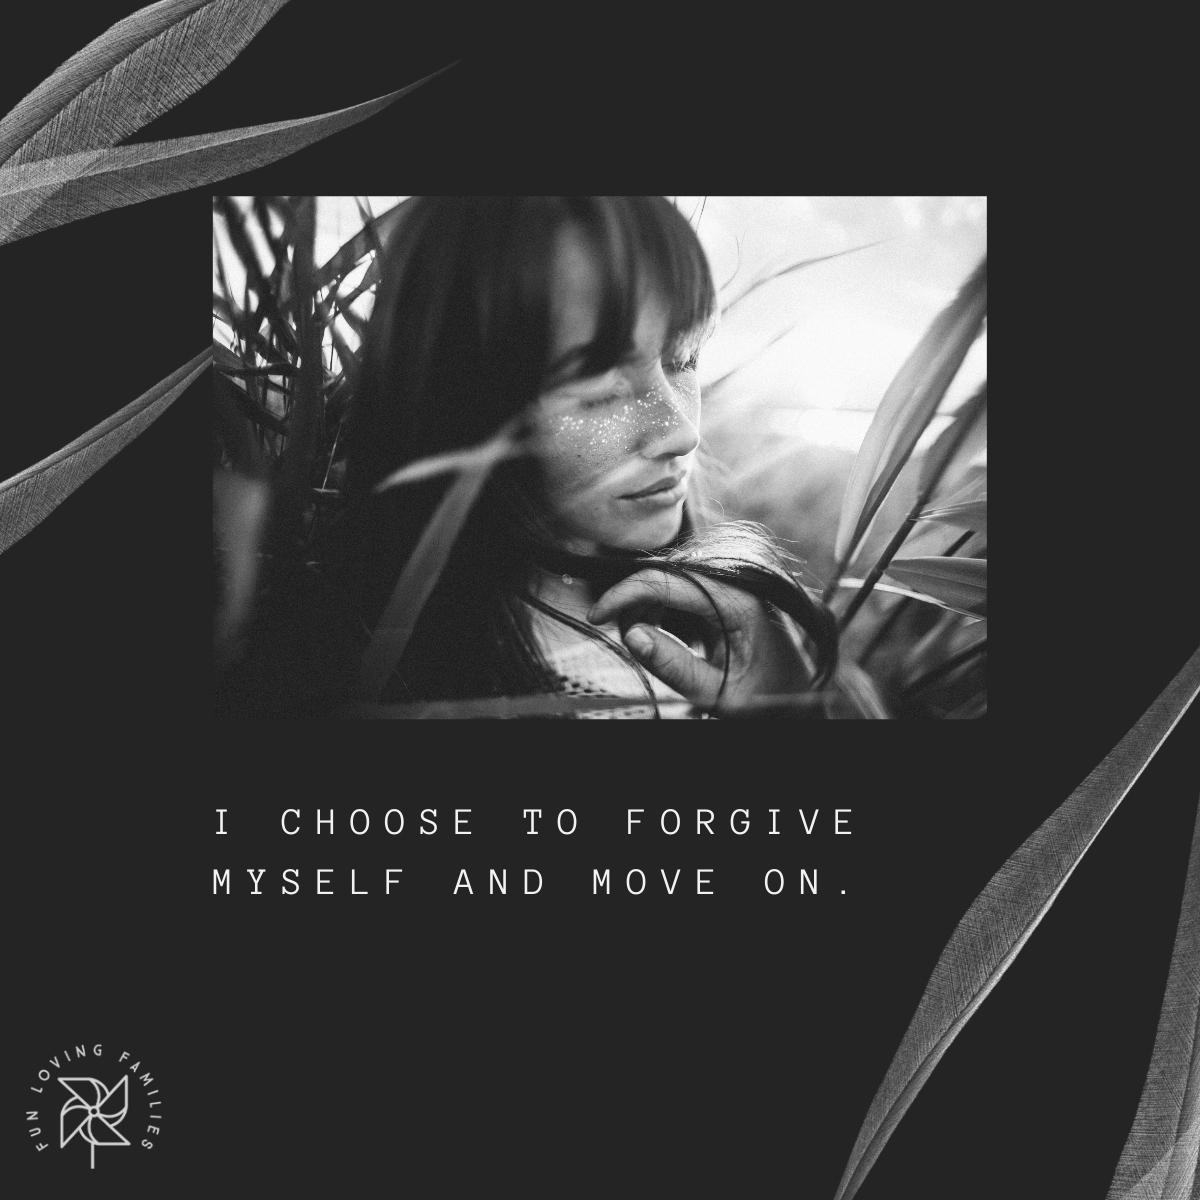 I choose to forgive myself and move on affirmation image